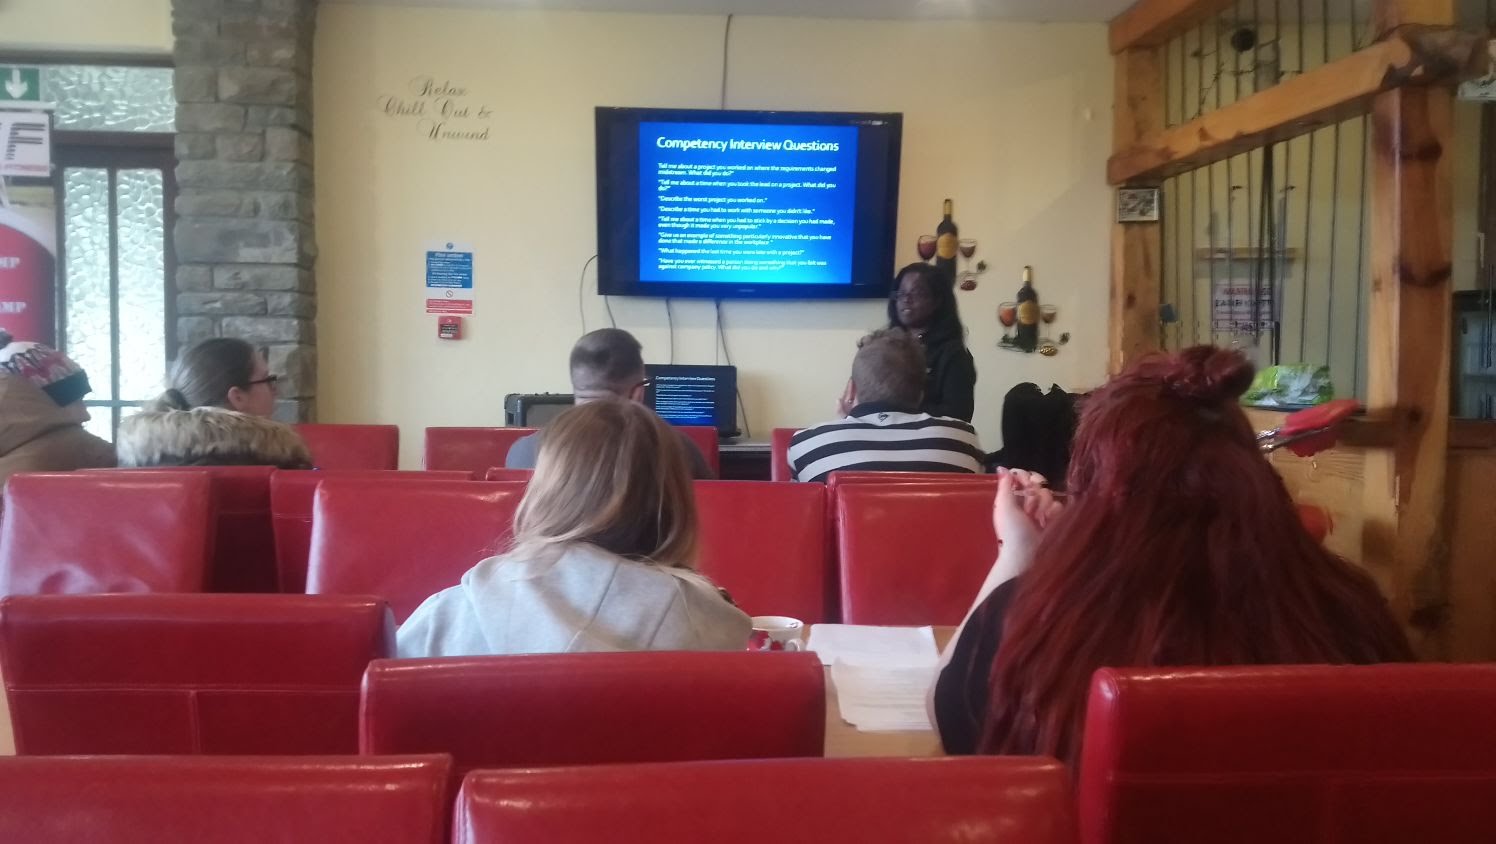 image of Interview Presentation course as part of Employability Skills training course.